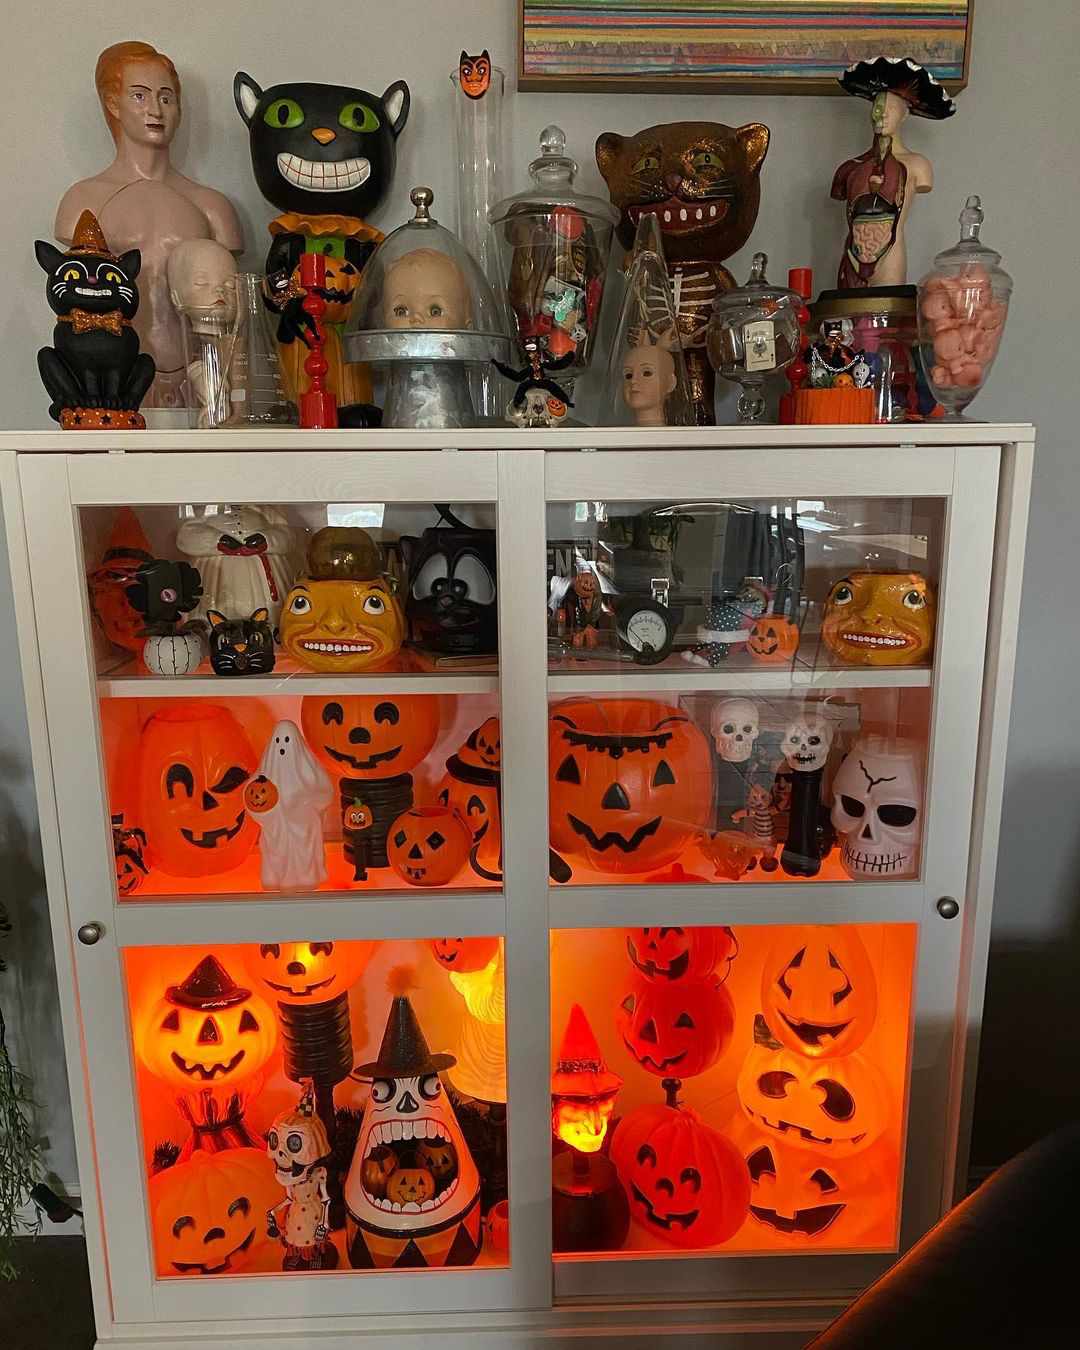 Cabinet display of pumpkins and more.